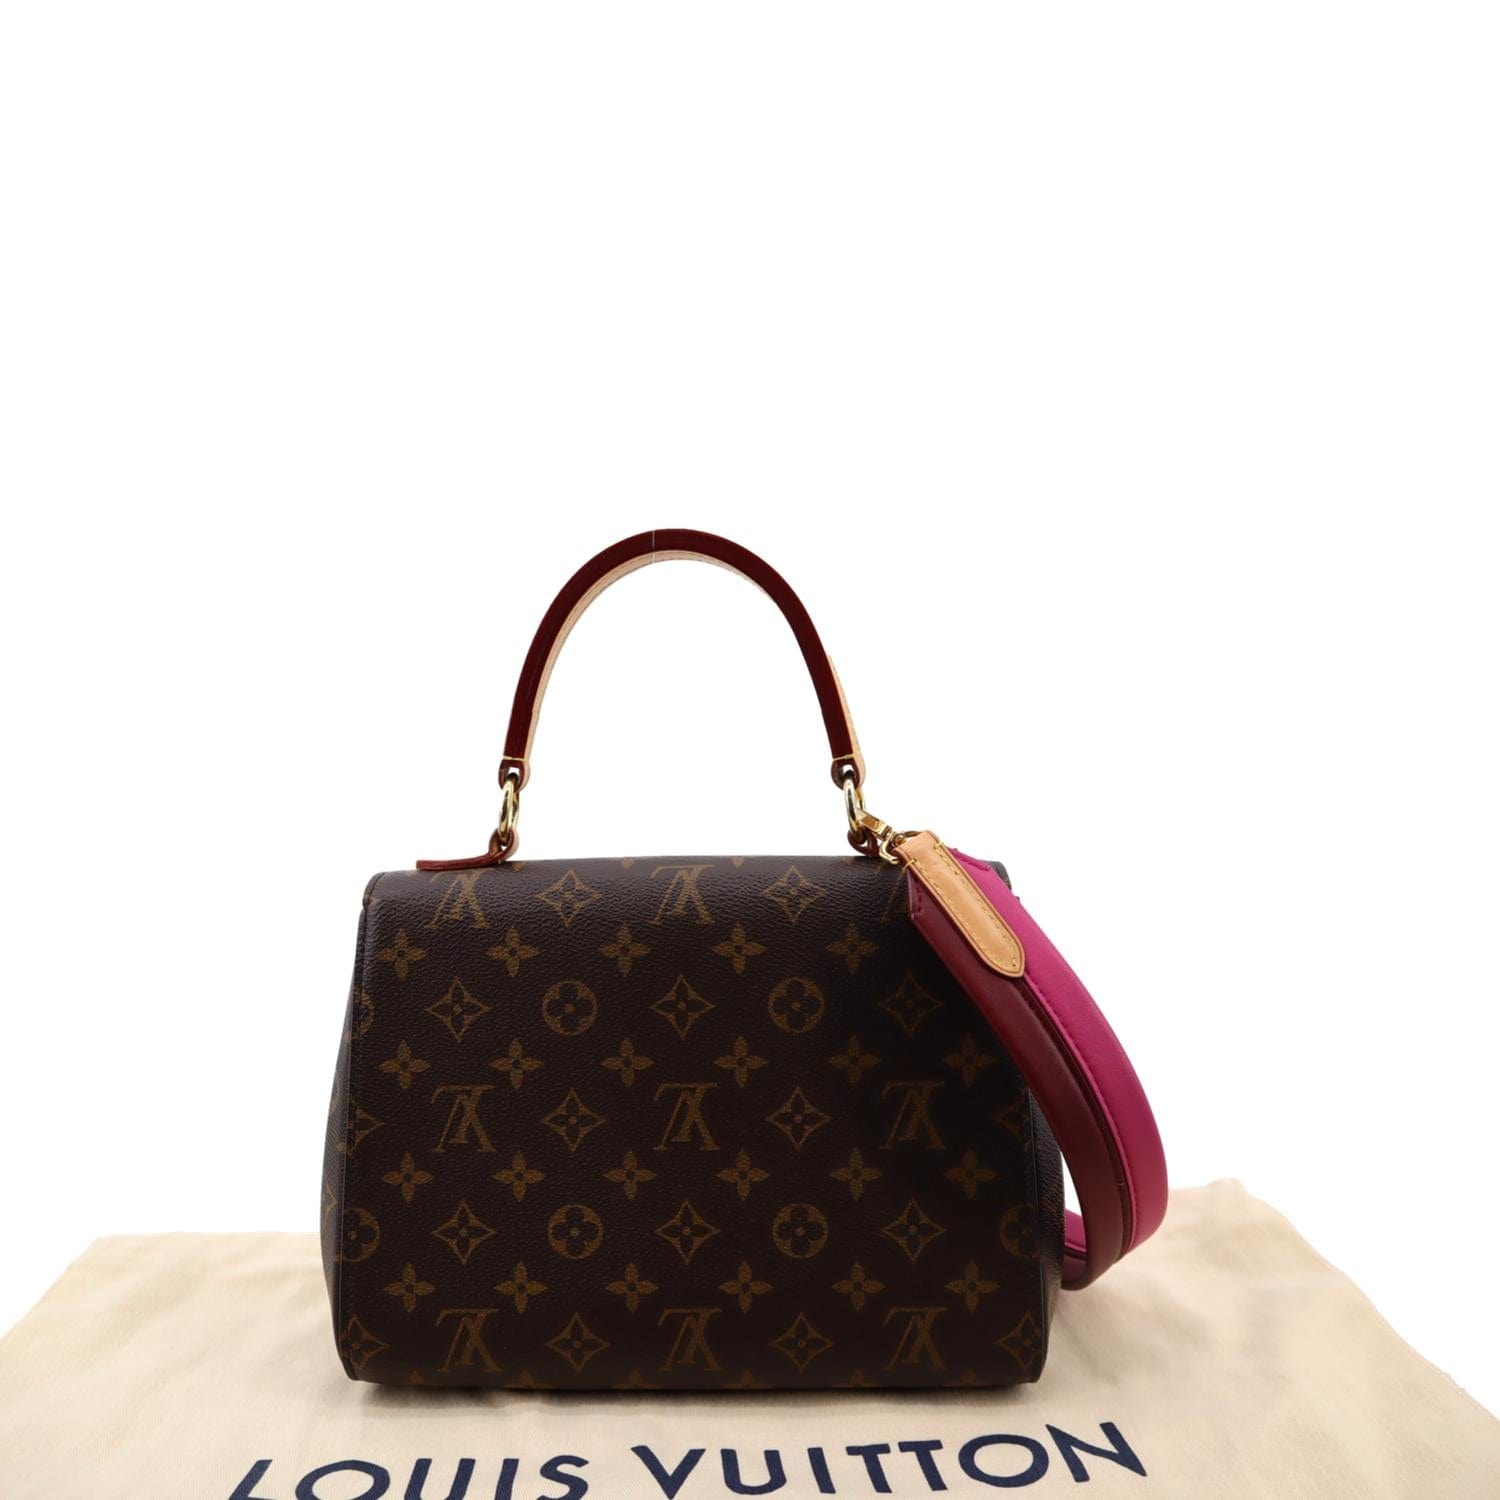 Louis Vuitton Cluny Bb in Blue